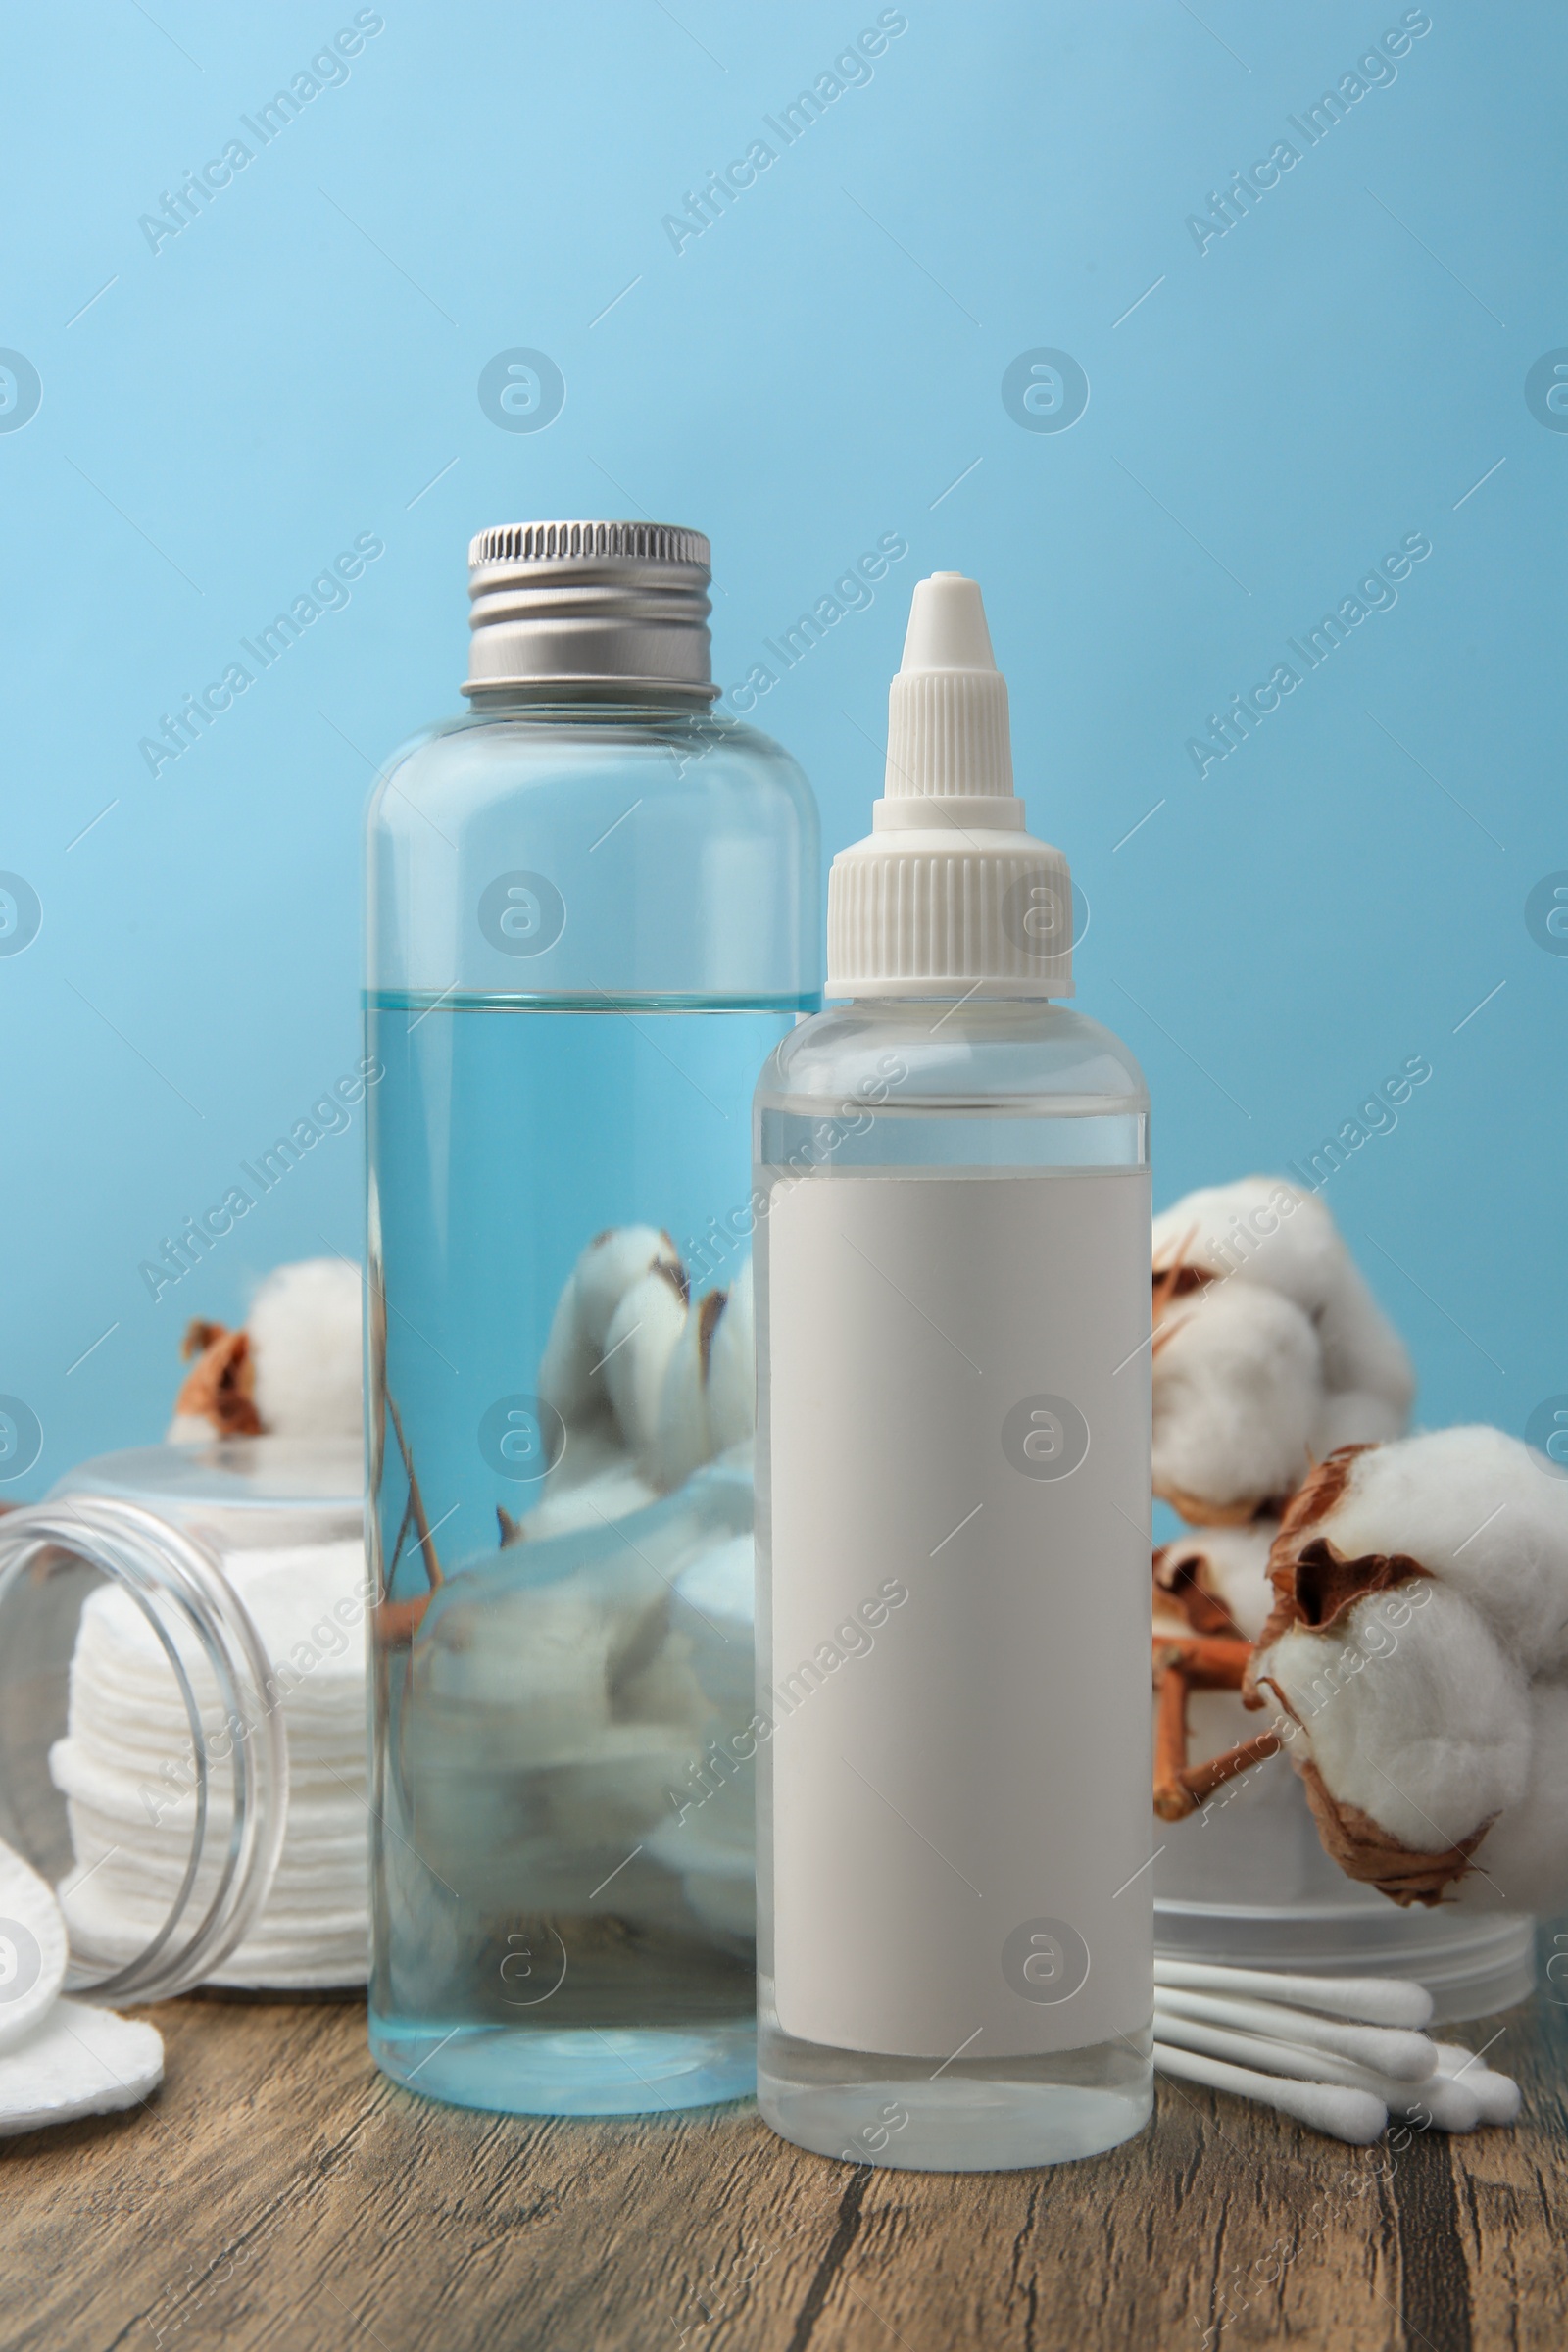 Photo of Composition with makeup removers and cotton flowers on wooden table against light blue background